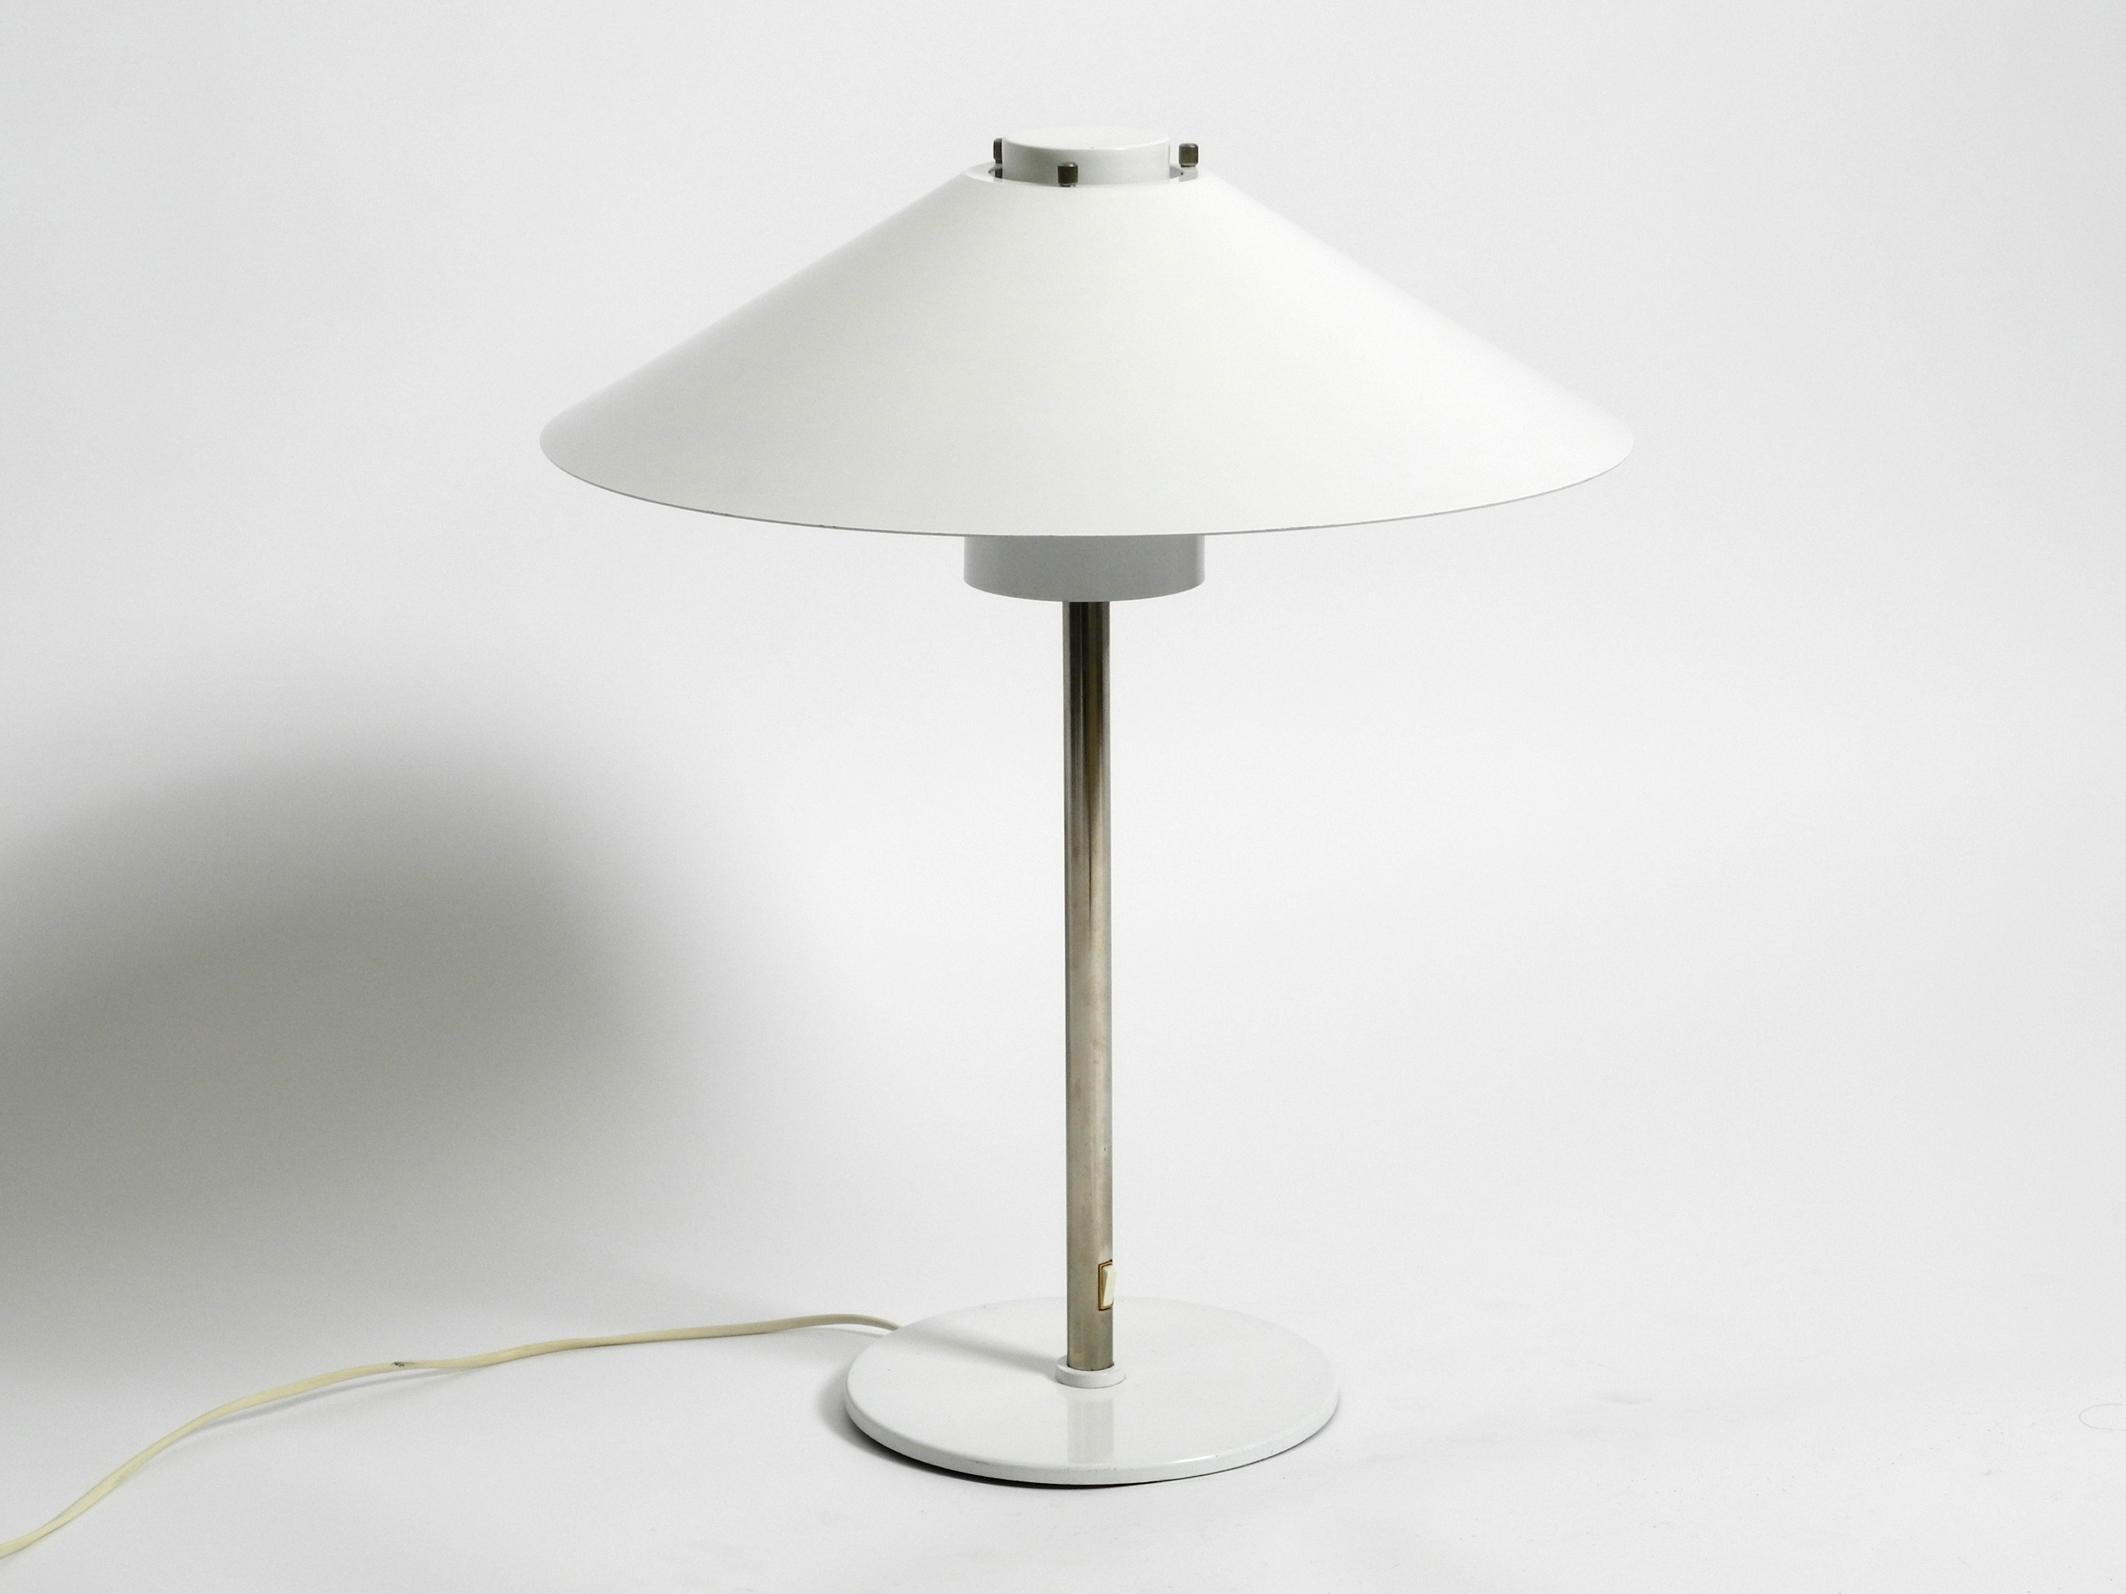 Beautiful rare 70s very big table lamp by Christian Hvidt for Nordisk Solar.
Very elegant minimalist design. Made in Denmark.
Entire lamp is made of metal in very good vintage condition.
With little signs of use. No bumps or dents on the screen,